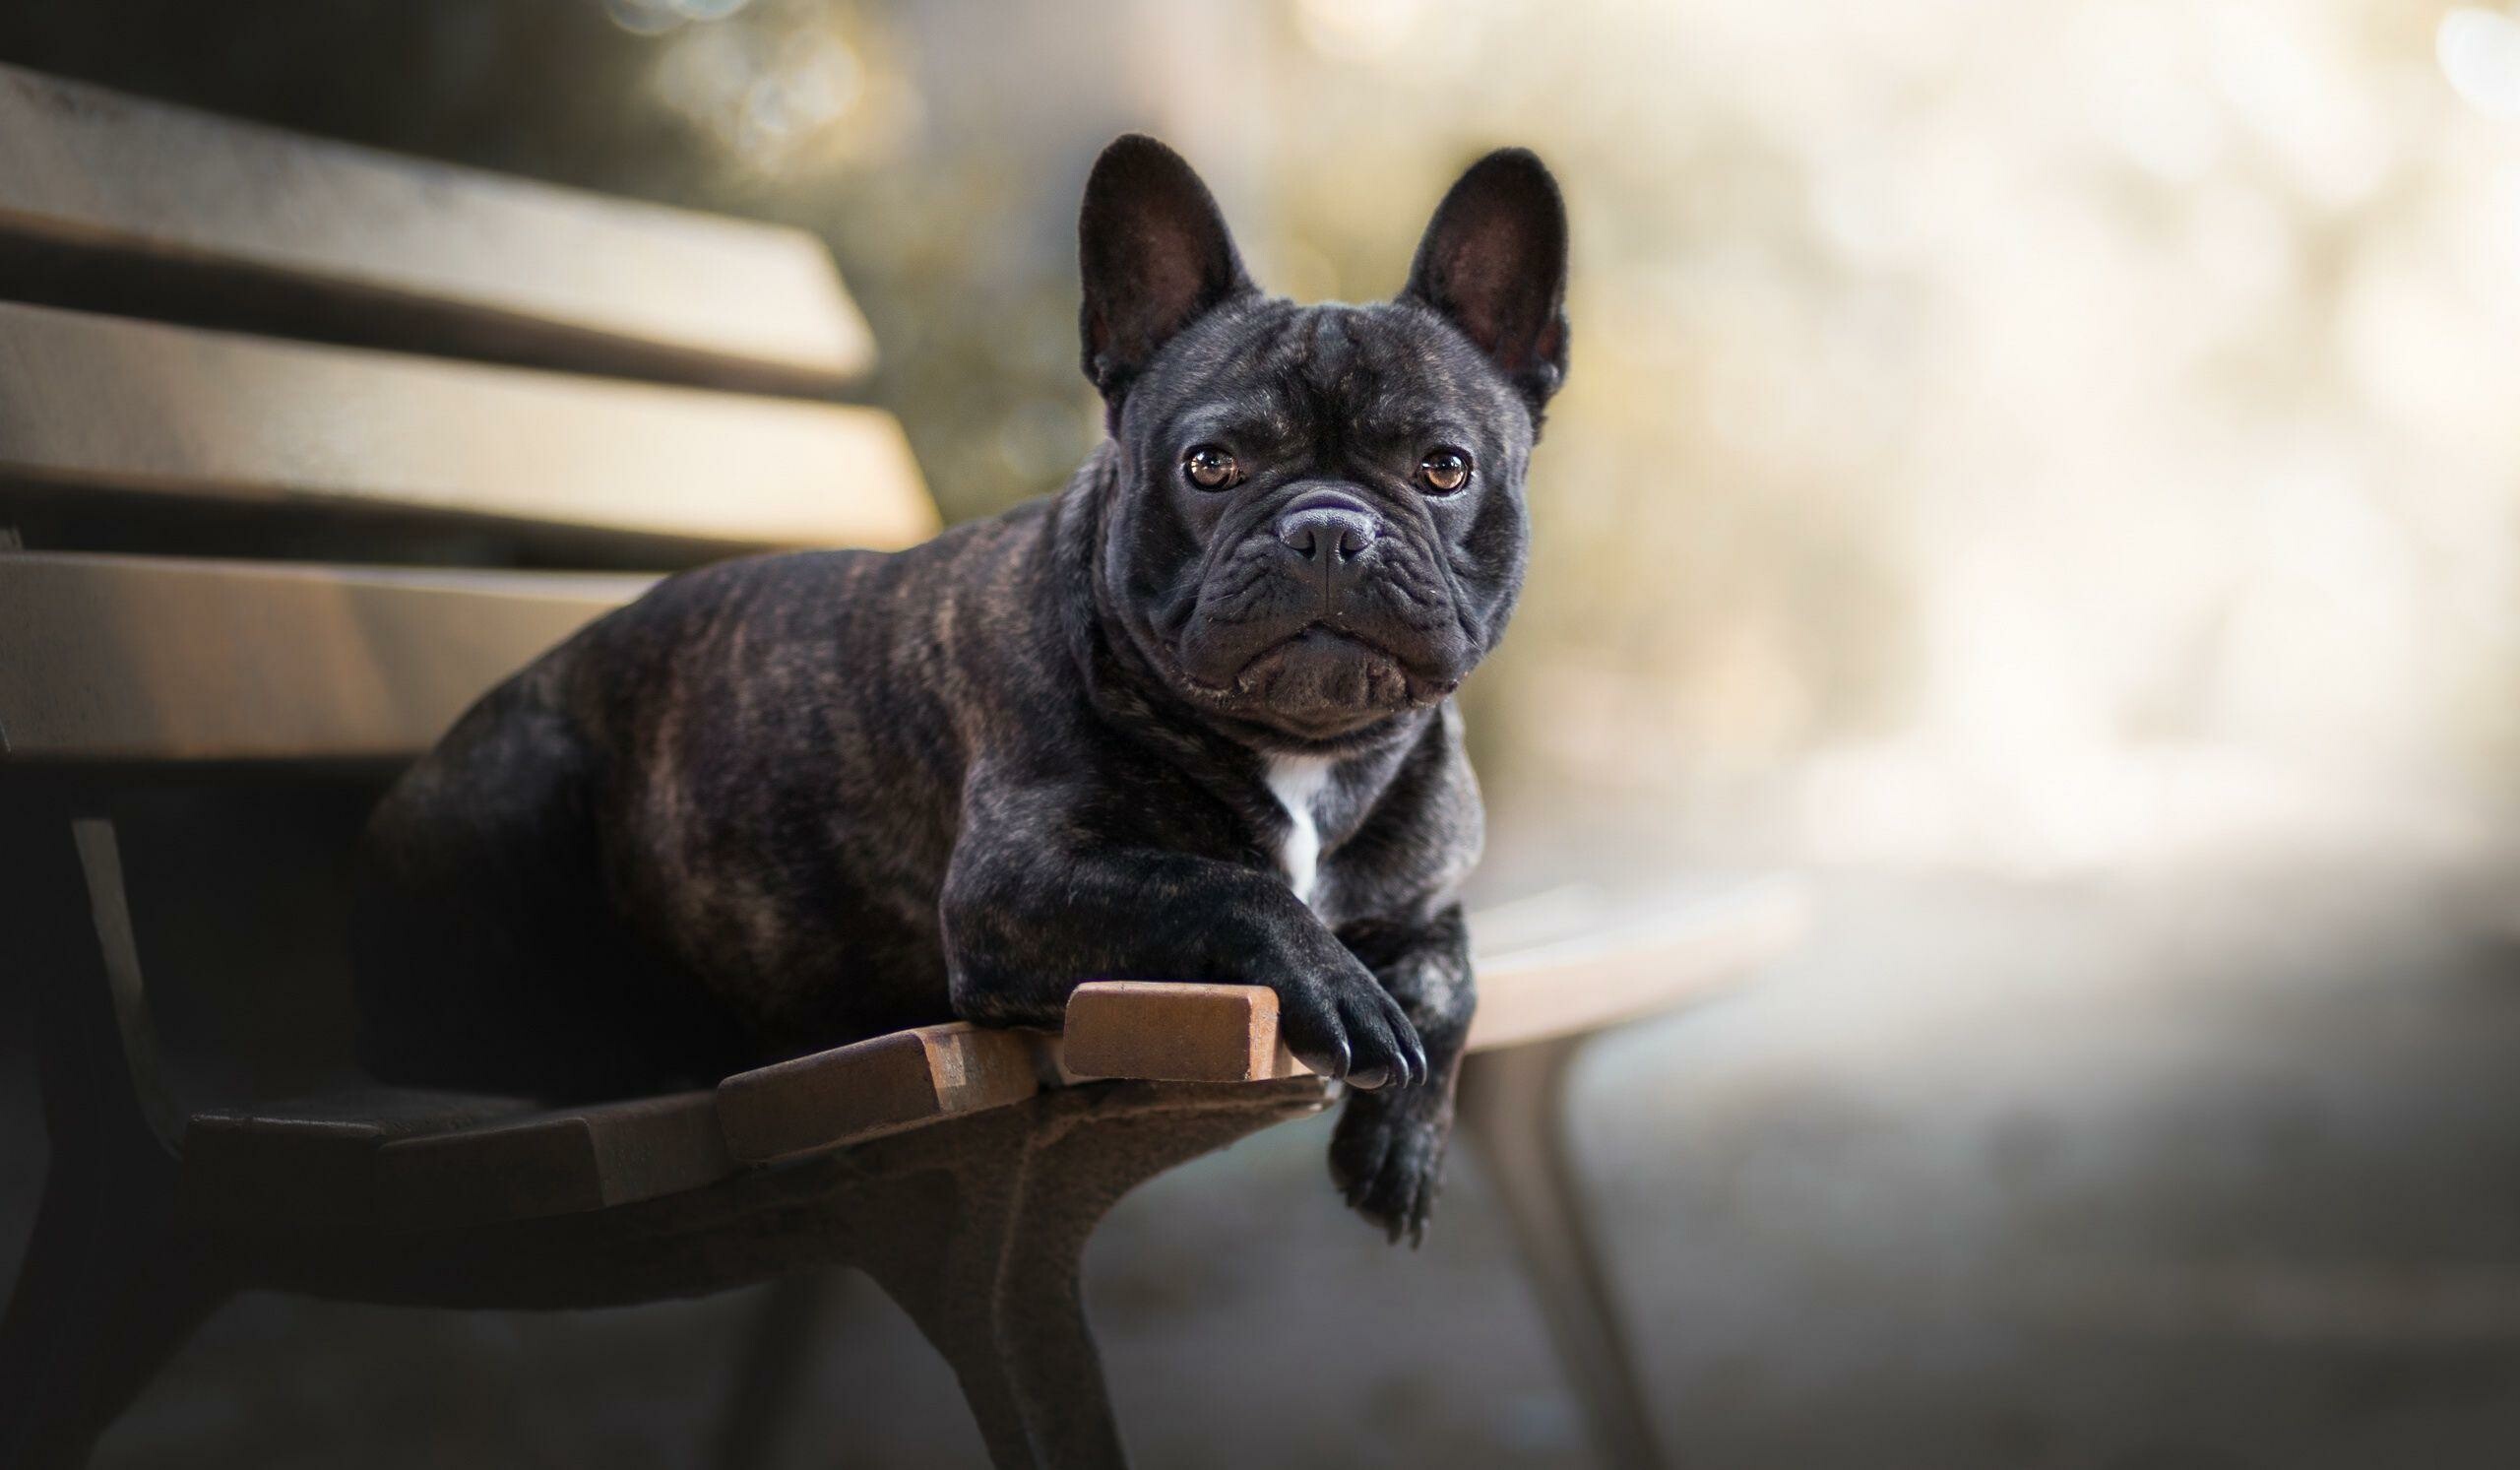 French Bulldog: The breed has heavy bone structure, a smooth coat, a short face and trademark “bat” ears. 2560x1500 HD Wallpaper.